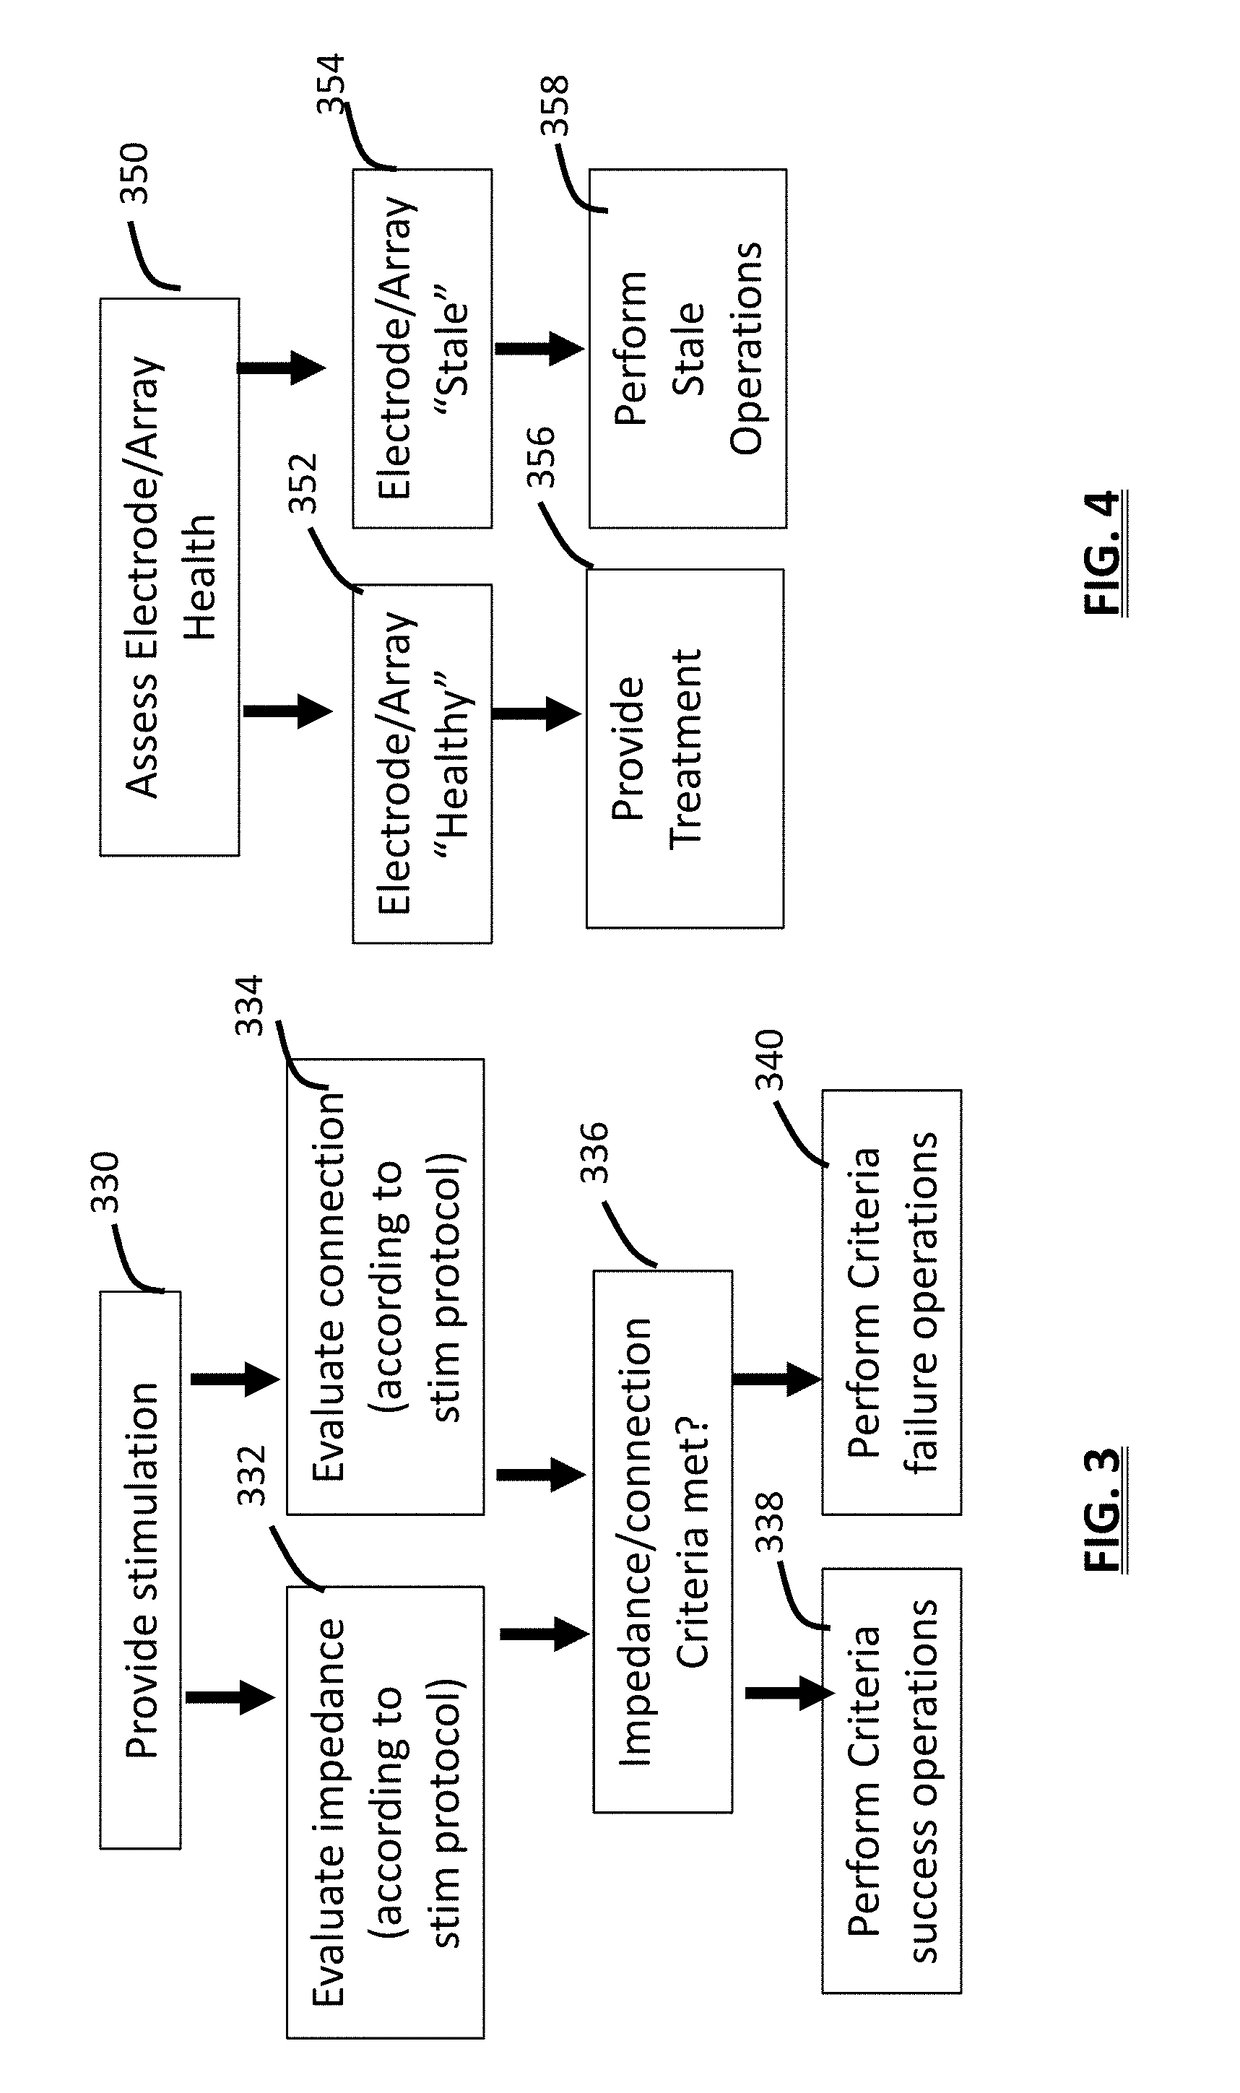 Systems and methods for providing patient signaling and contingent stimulation